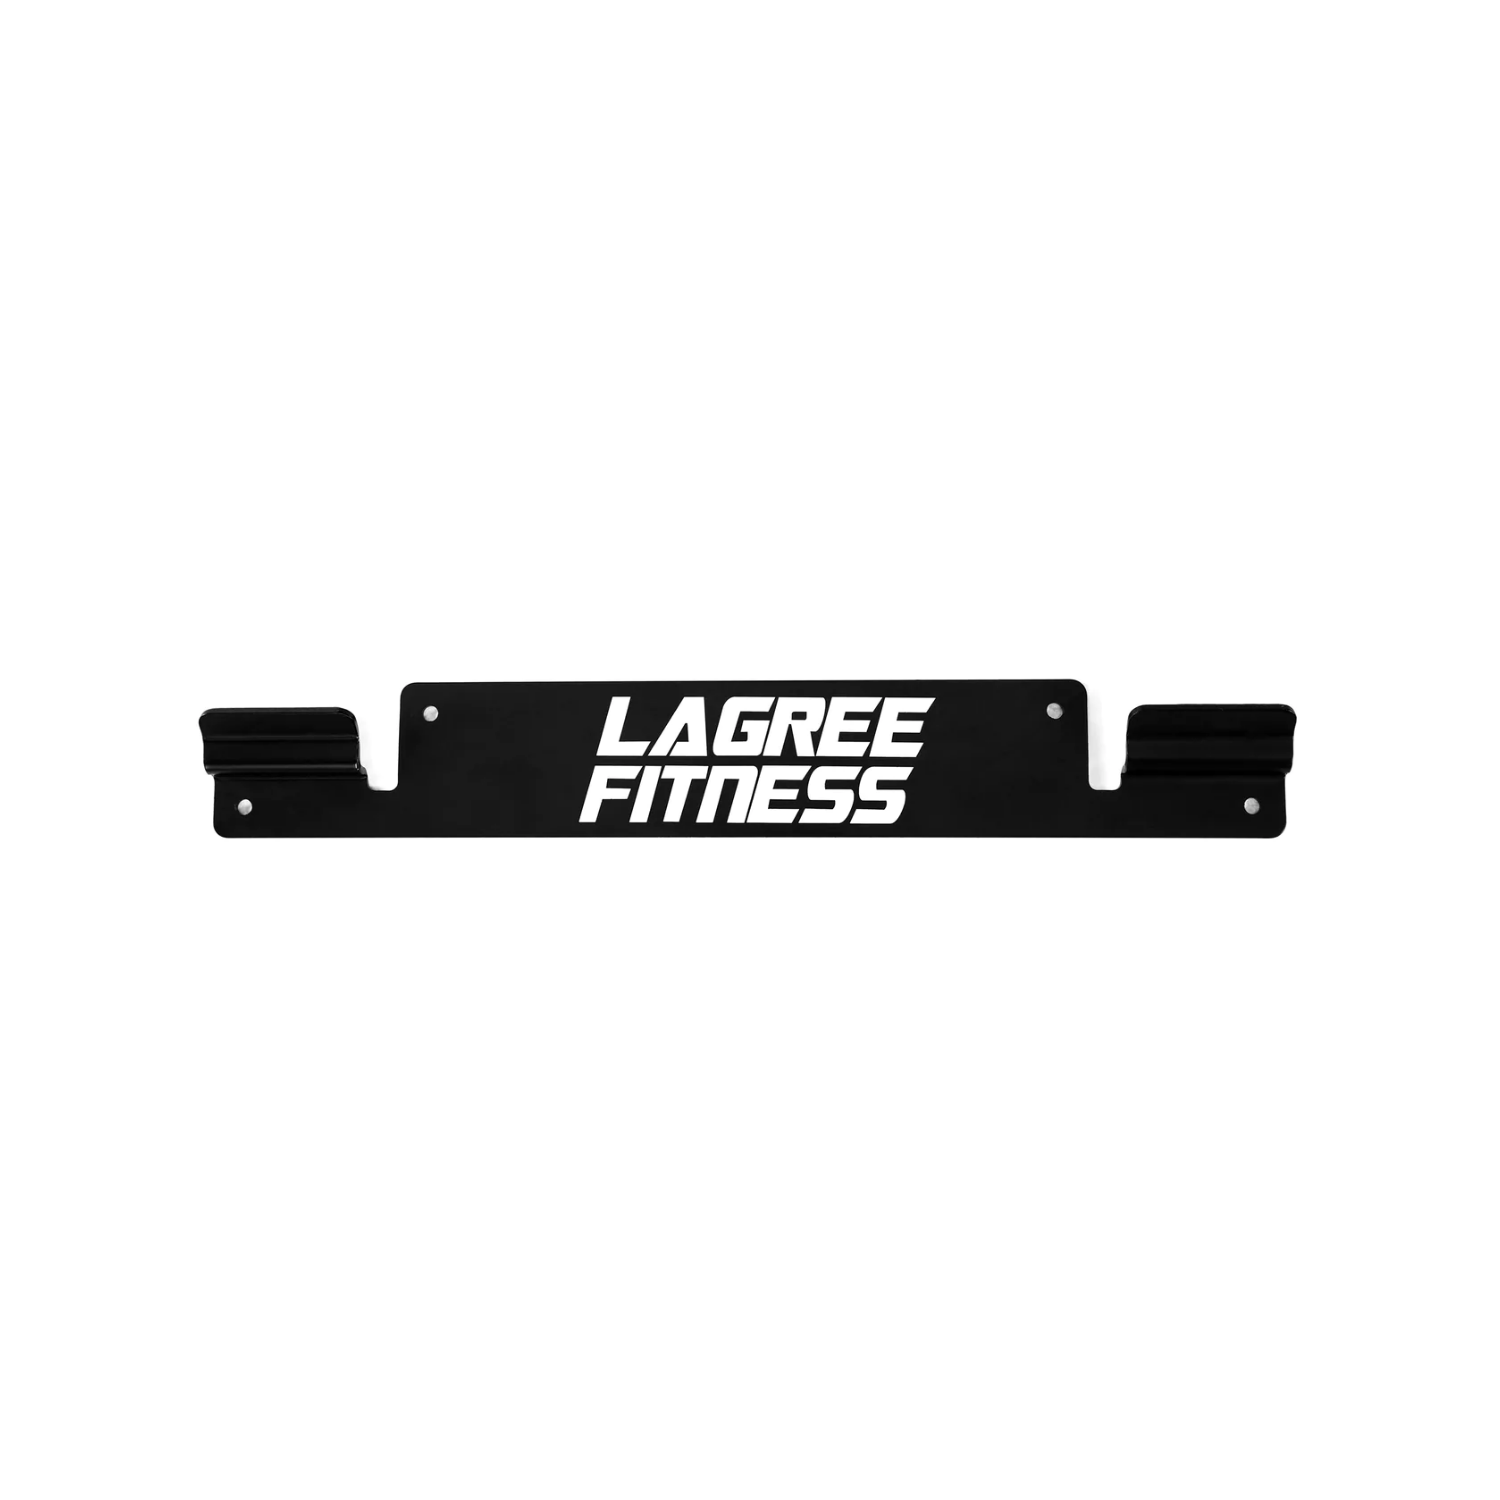 Shop Lagree Fitness Machines and Accessories